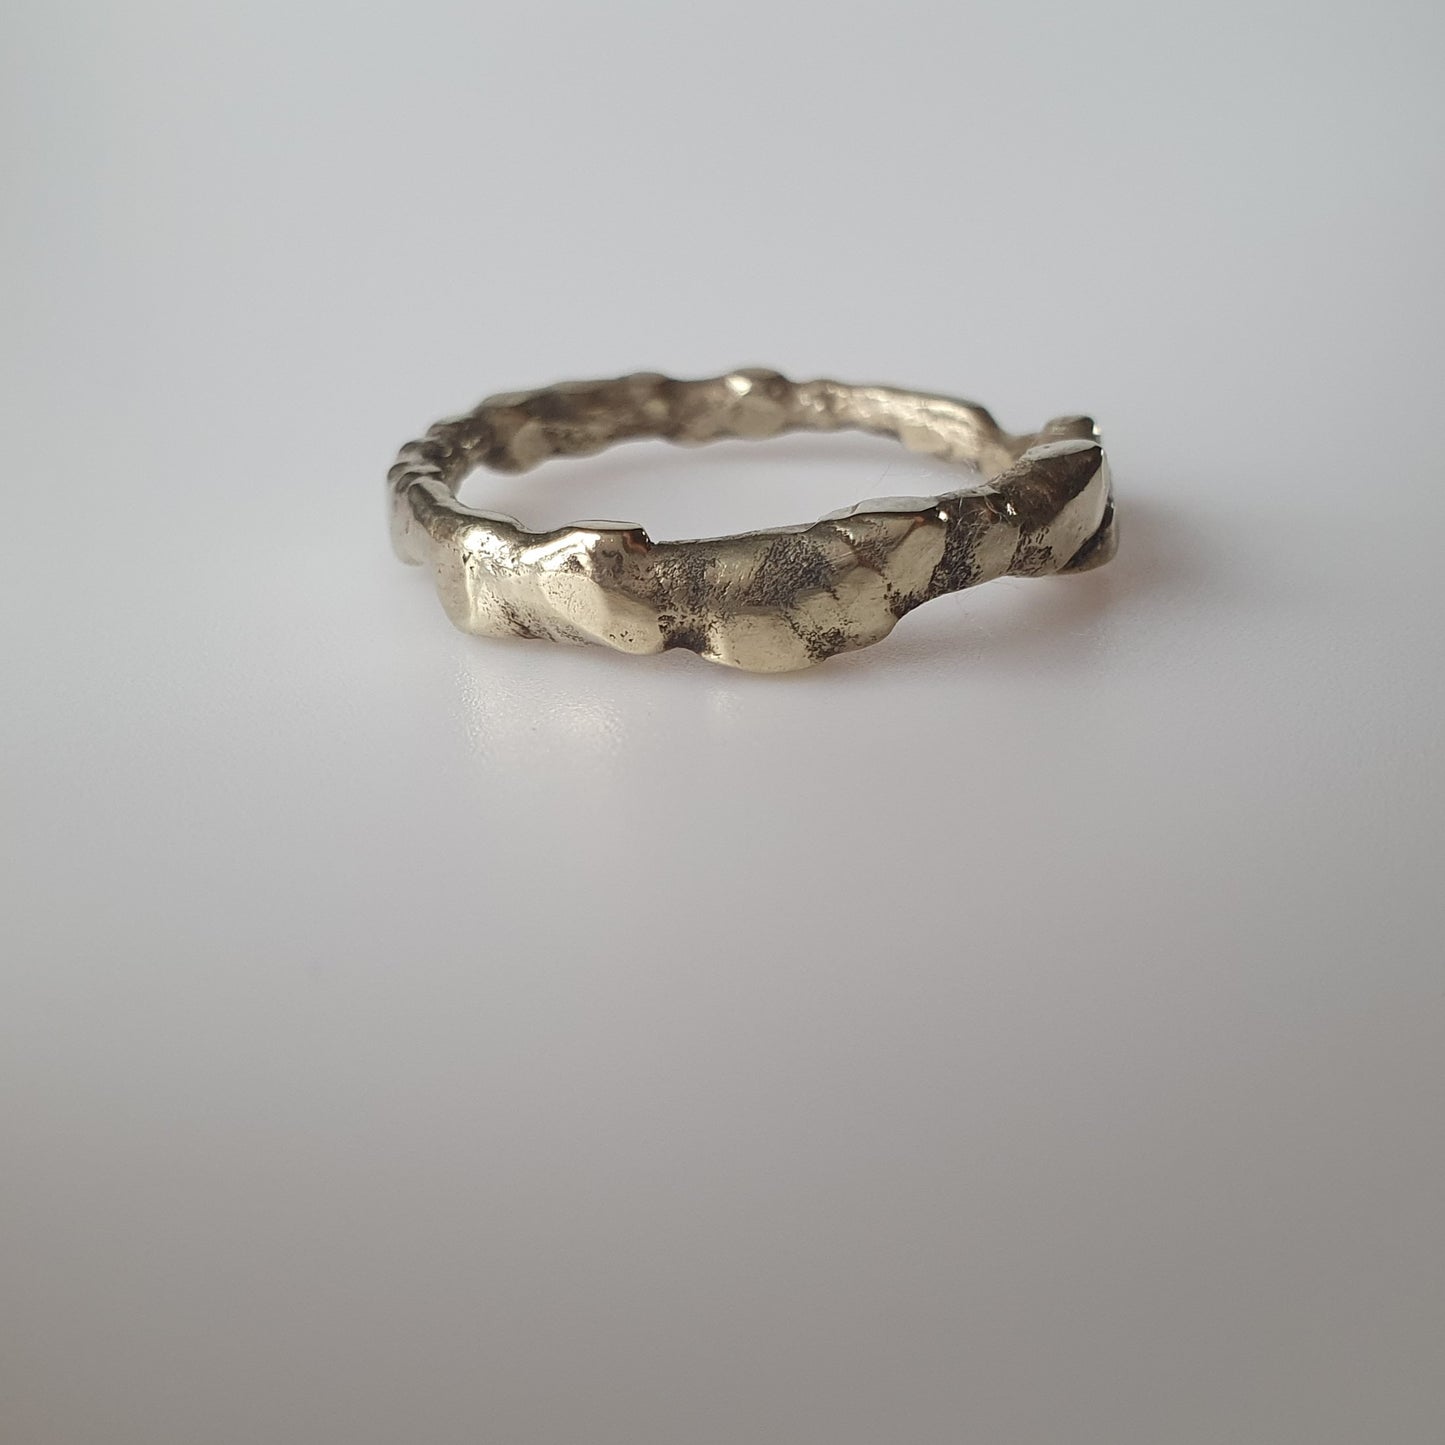 18ct gold plated on Sterling silver ring,Raw,Unrefined, Industrial,Bold,Unconventional,Edgy,Asymmetrical,Iregular,Chunky, Avant Garde, experimental, vintage